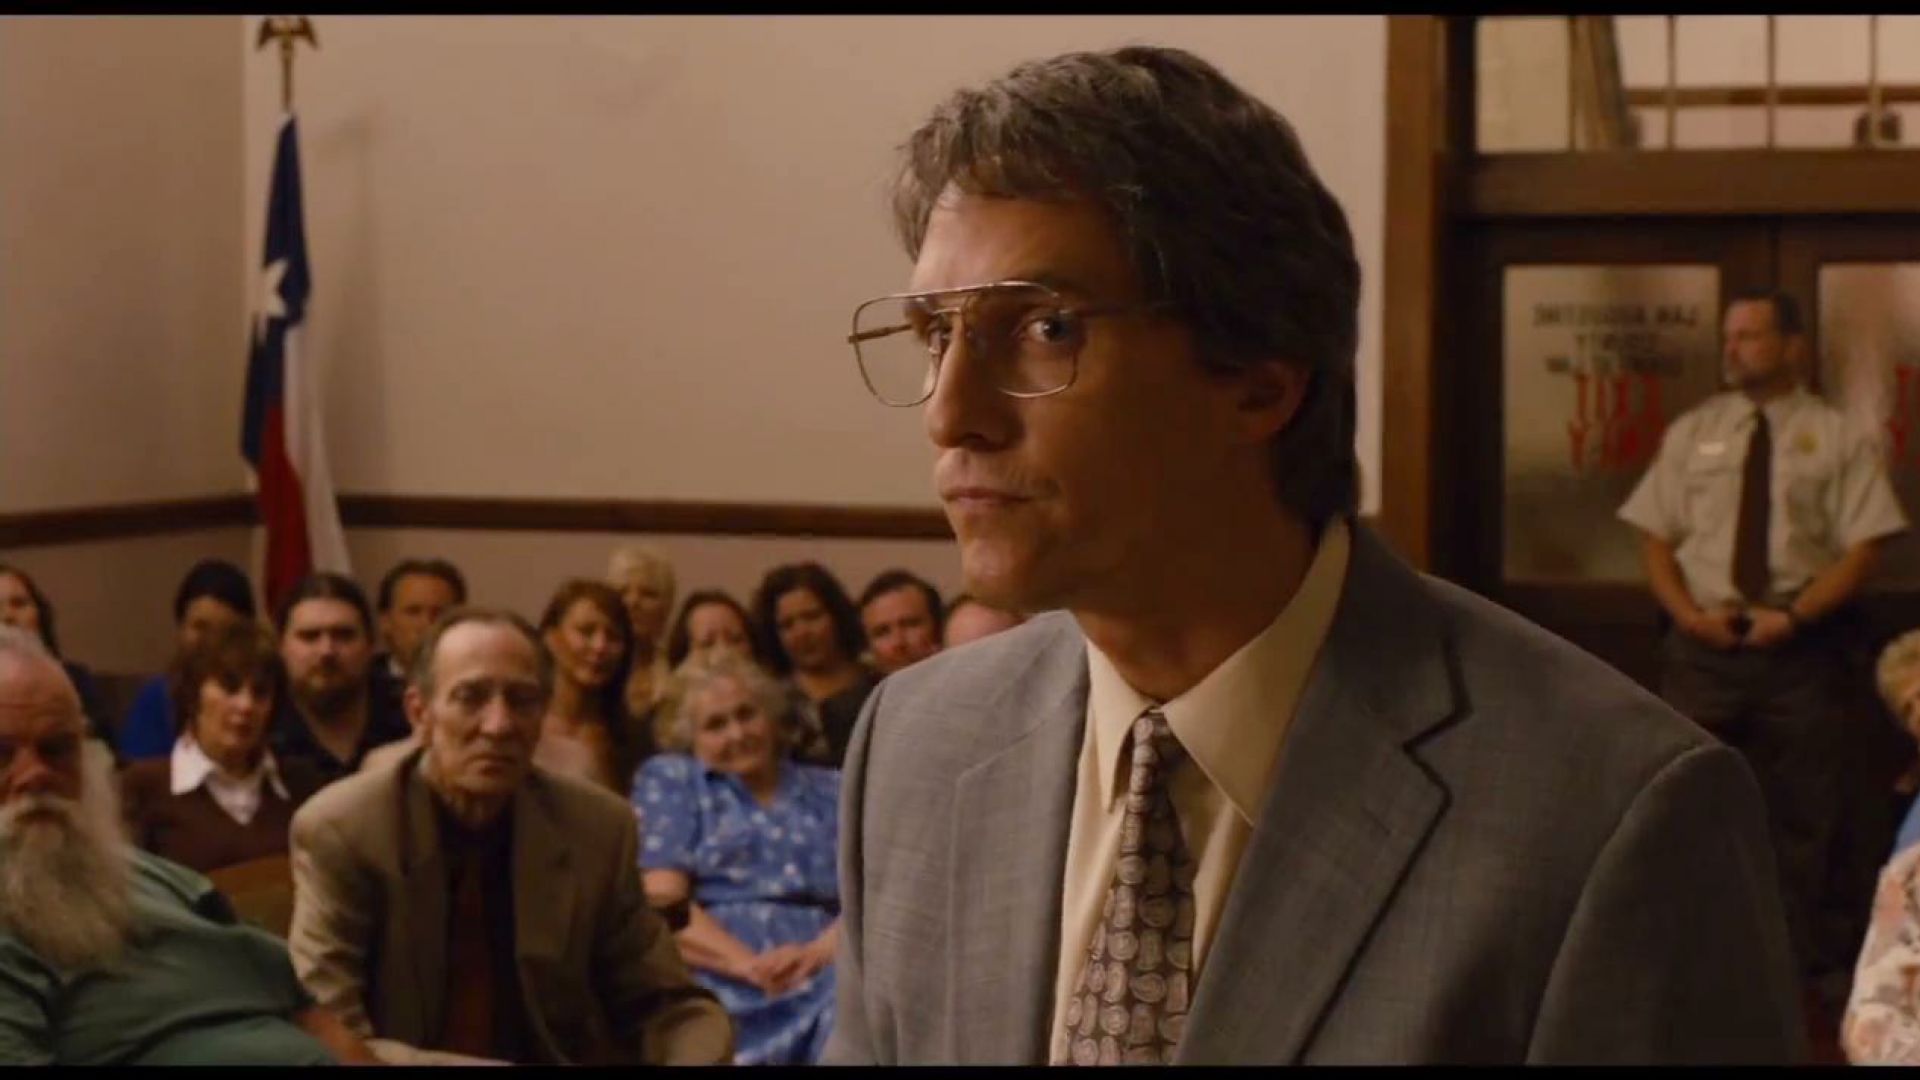 What kind of wine are you supposed to have with fish? Matthew McConaughey in Bernie